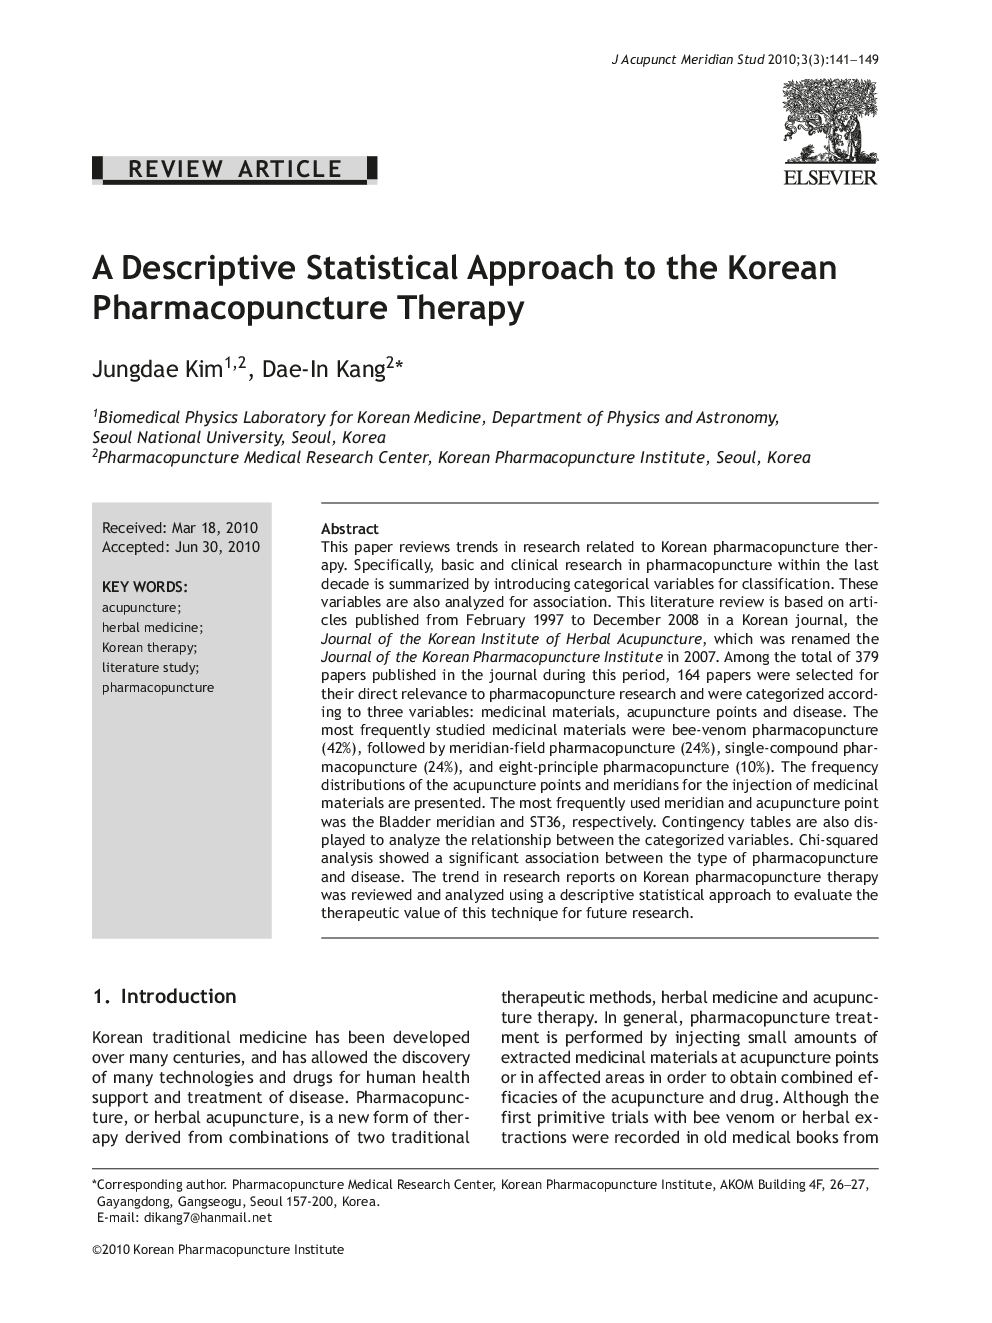 A Descriptive Statistical Approach to the Korean Pharmacopuncture Therapy